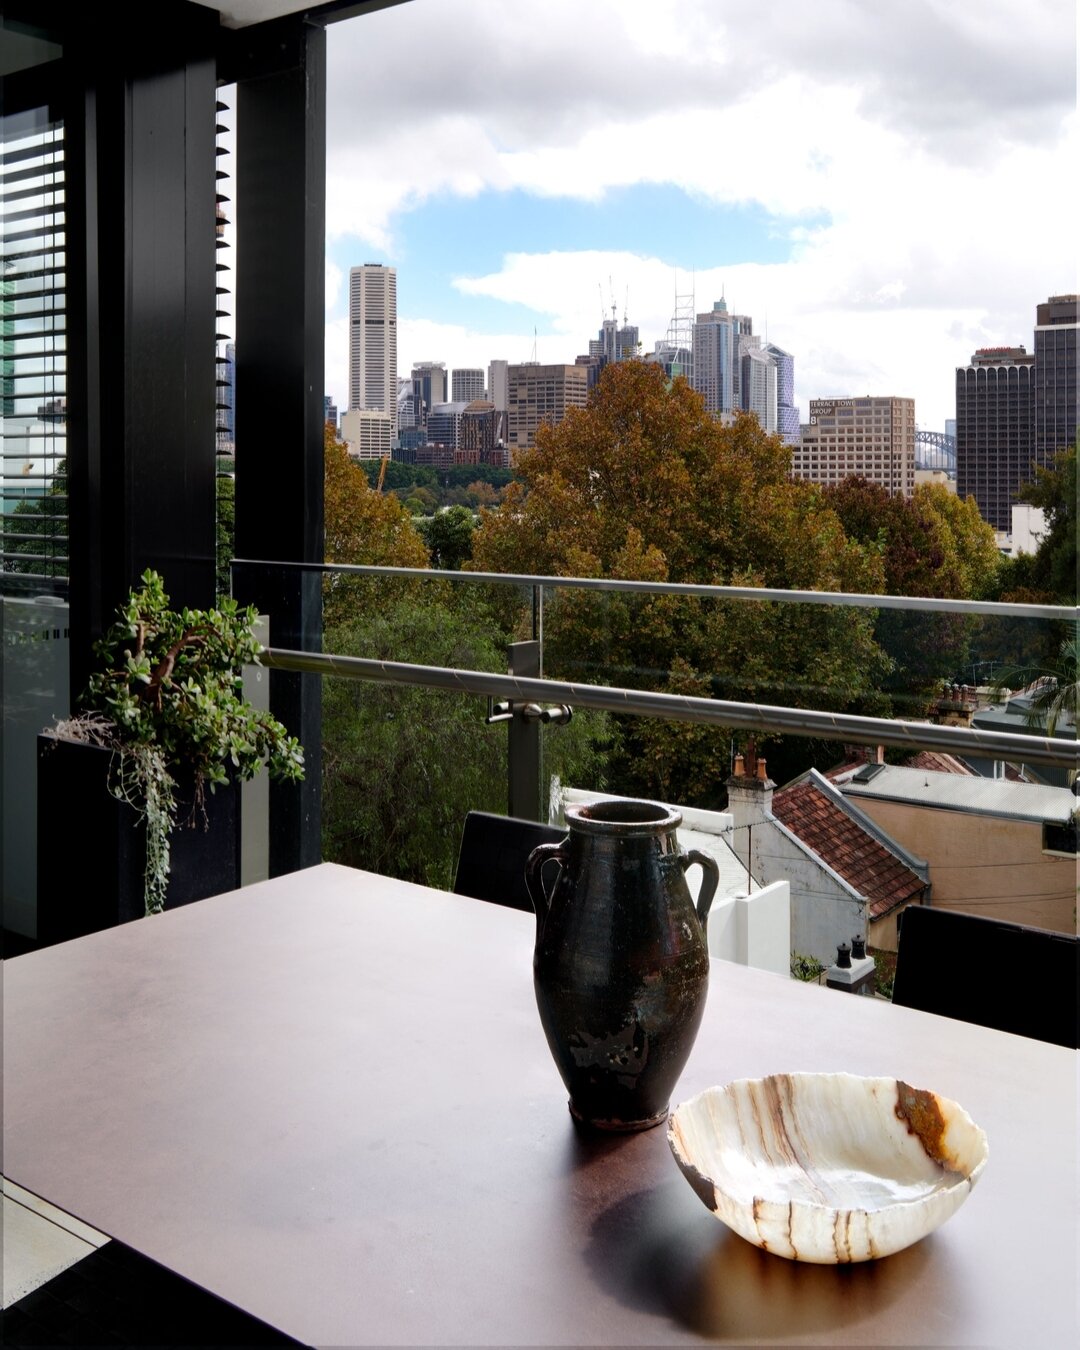 DARLINGHURST APARTMENT - Perched high above Darlinghurst, where cityscape meets serenity. Captivated by Sydney's charm, one view at a time.